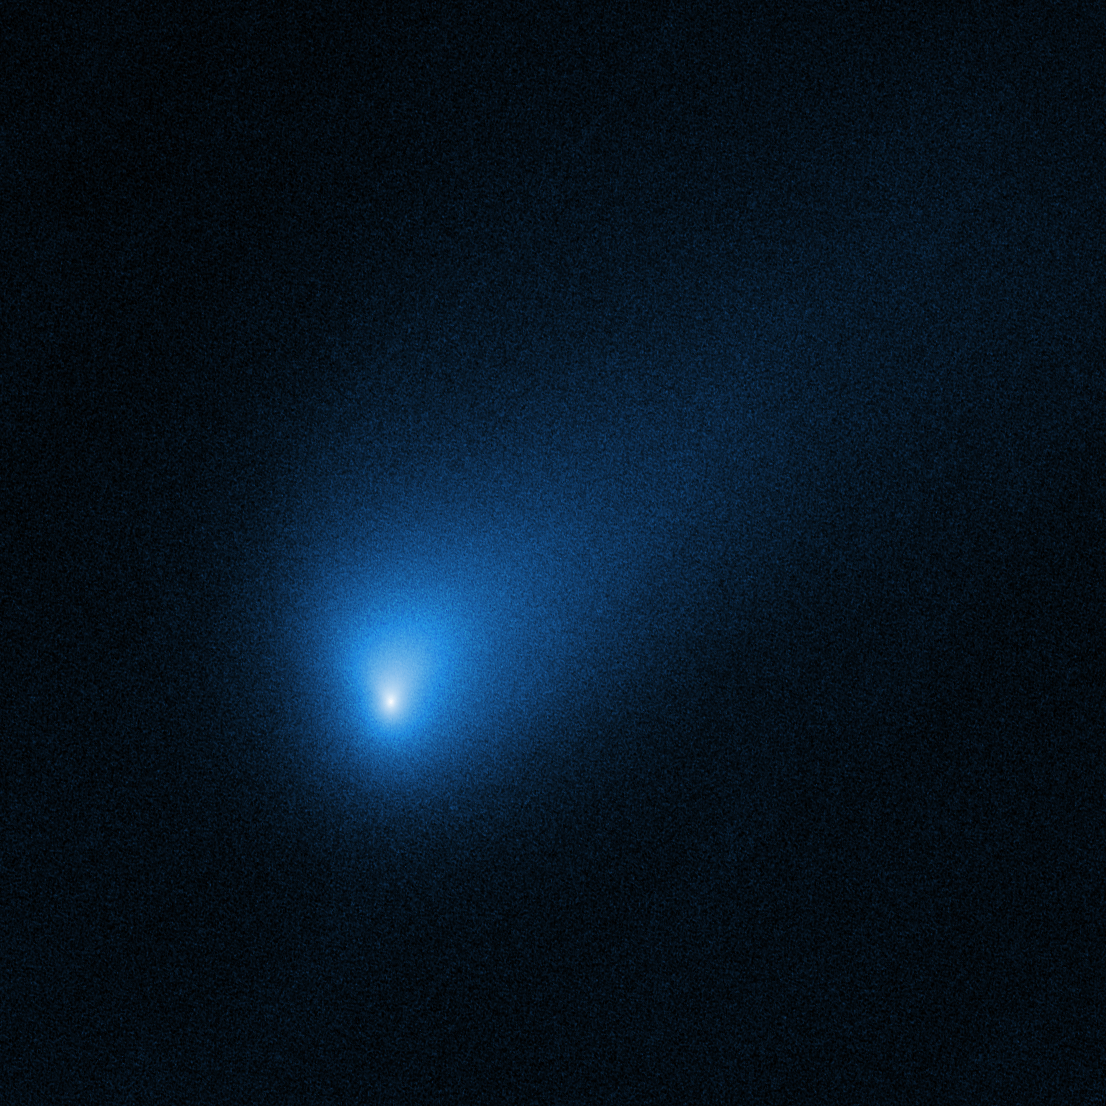 Bright blue object (comet) in the center surrounded by the blackness of space.